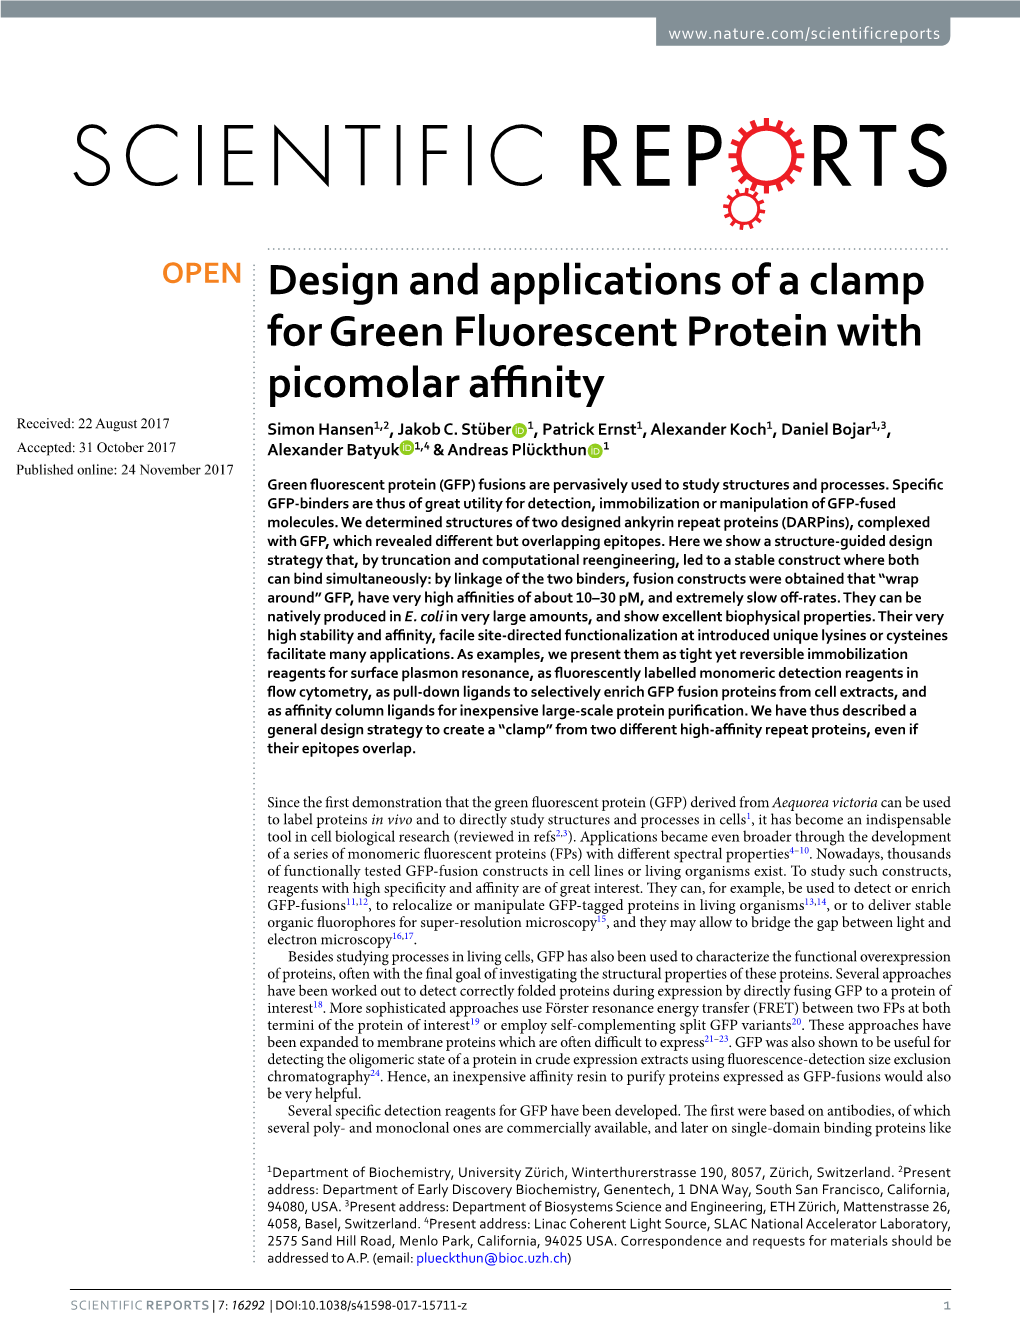 Design and Applications of a Clamp for Green Fluorescent Protein with Picomolar Afnity Received: 22 August 2017 Simon Hansen1,2, Jakob C